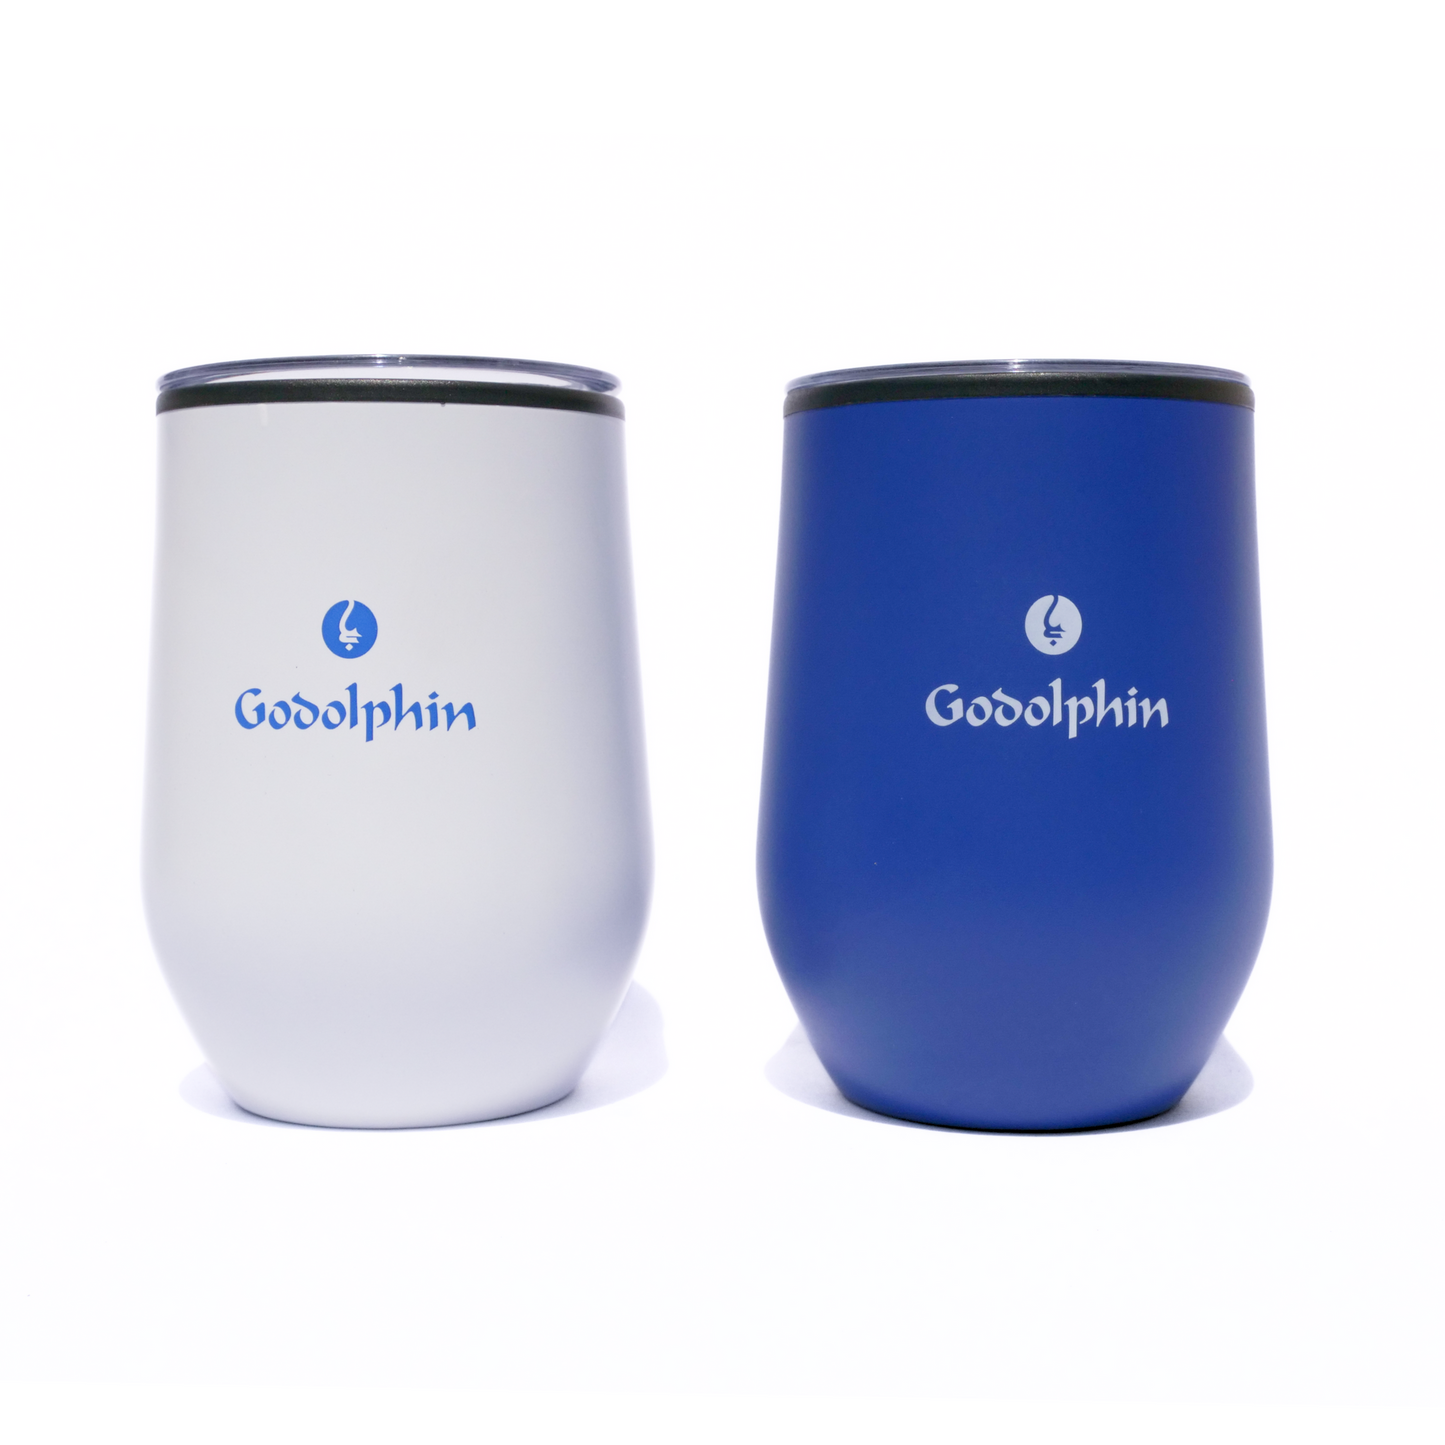 Godolphin Keep Cup - White